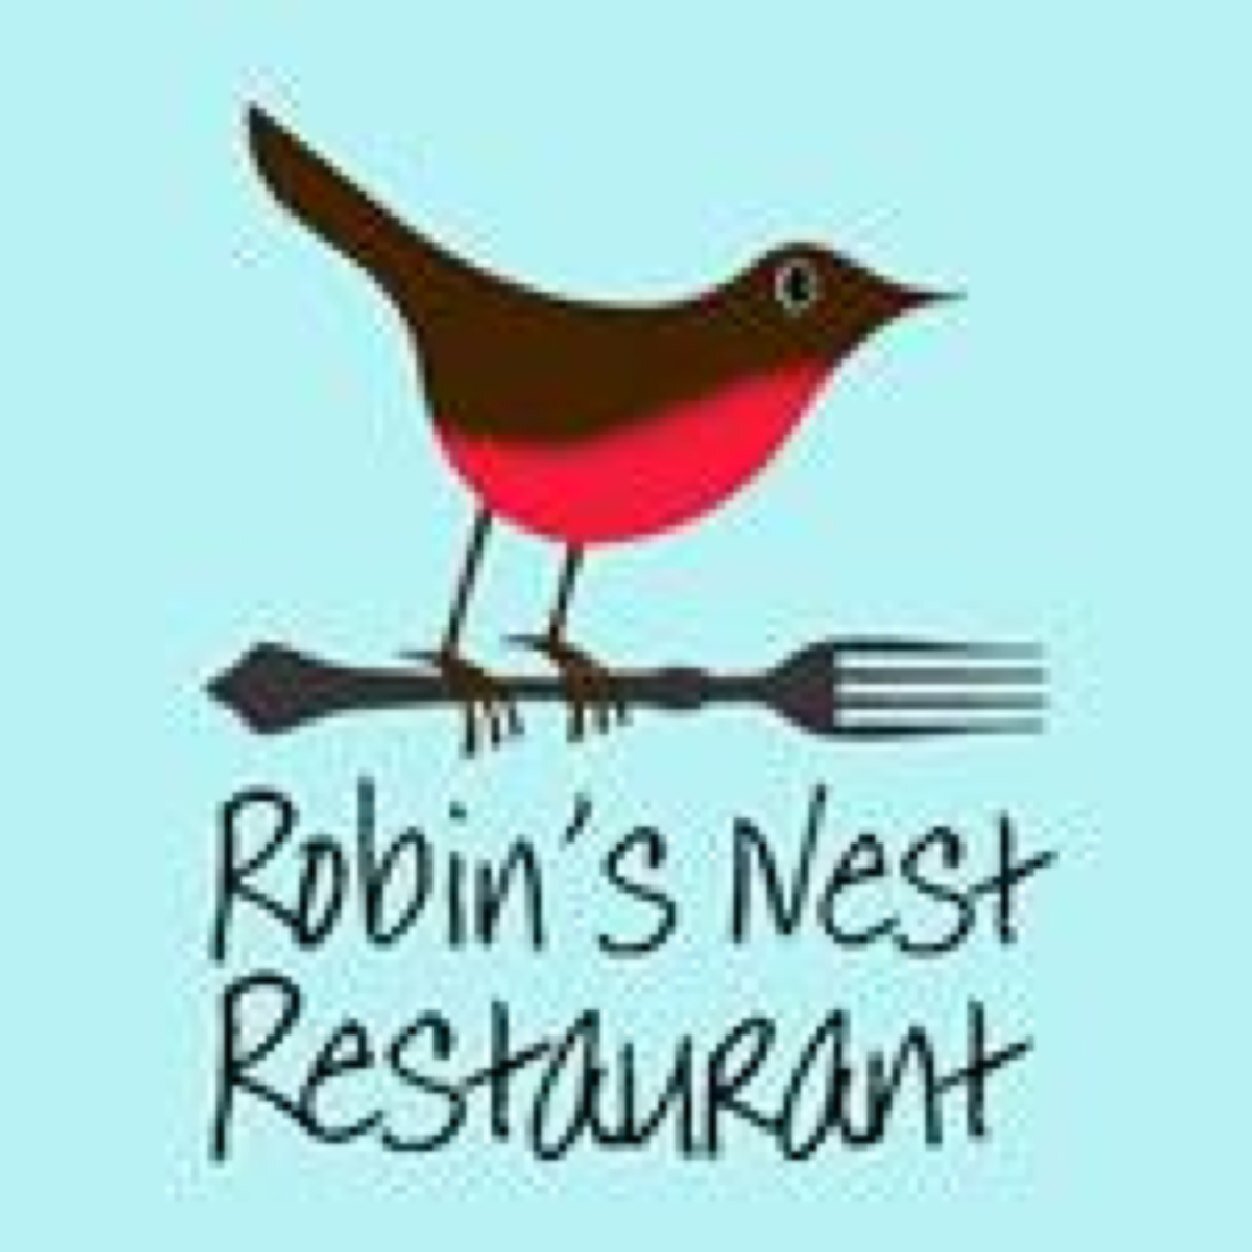 Come visit the Historic Robin's Nest Restaurant & Enjoy a Delicious Lunch, Intimate Dinner, Relaxing Sunday Brunch or Evening Cocktail in an Old-fashioned Bar.